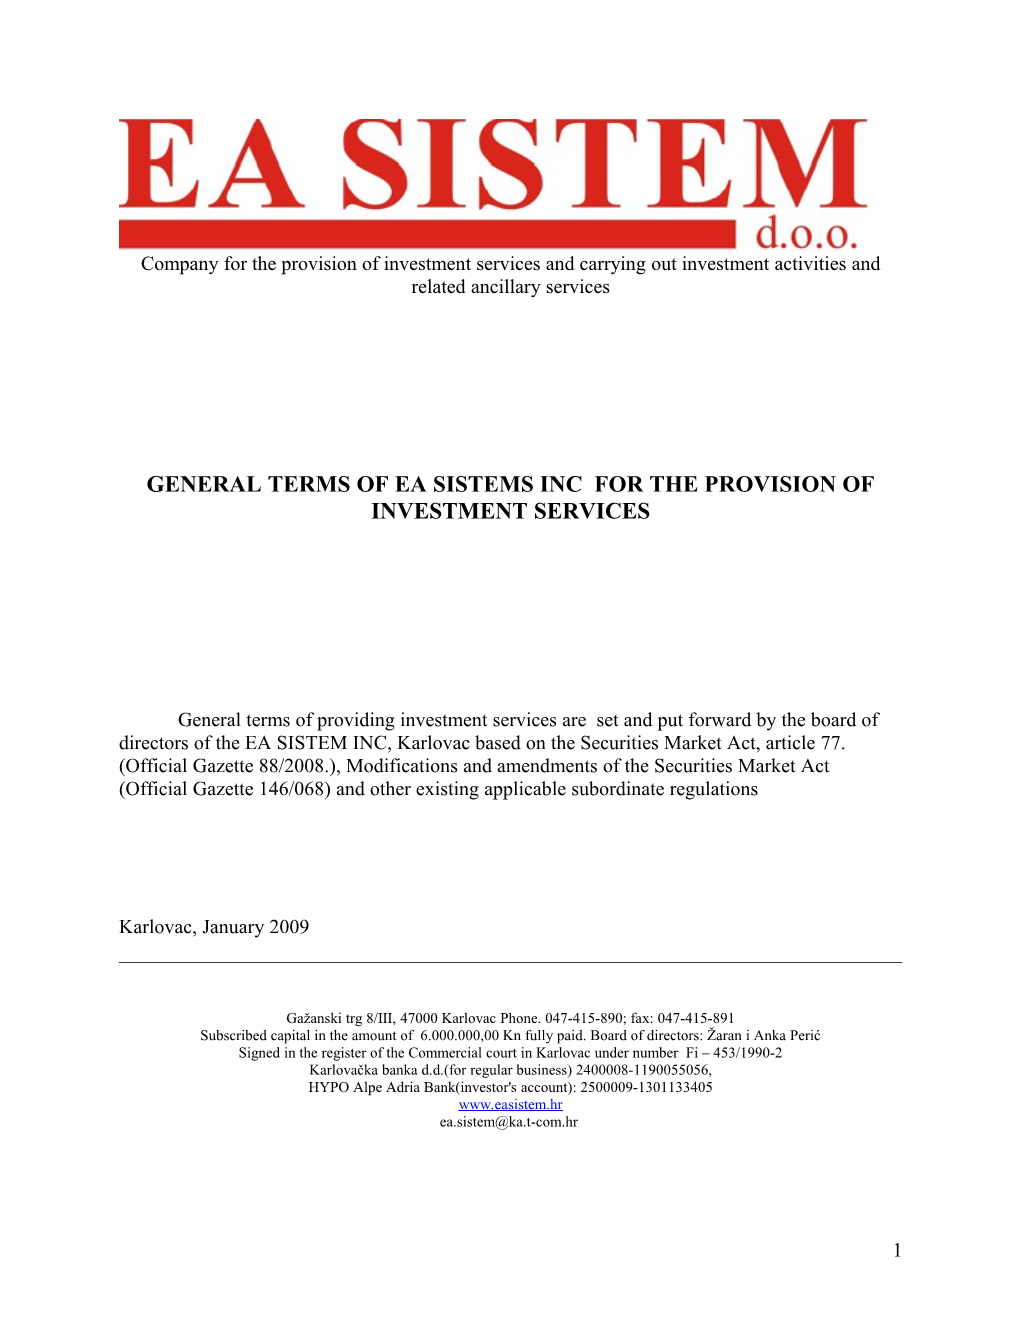 GENERAL TERMS of EA SISTEMS Inc for the Provision of Investment Services